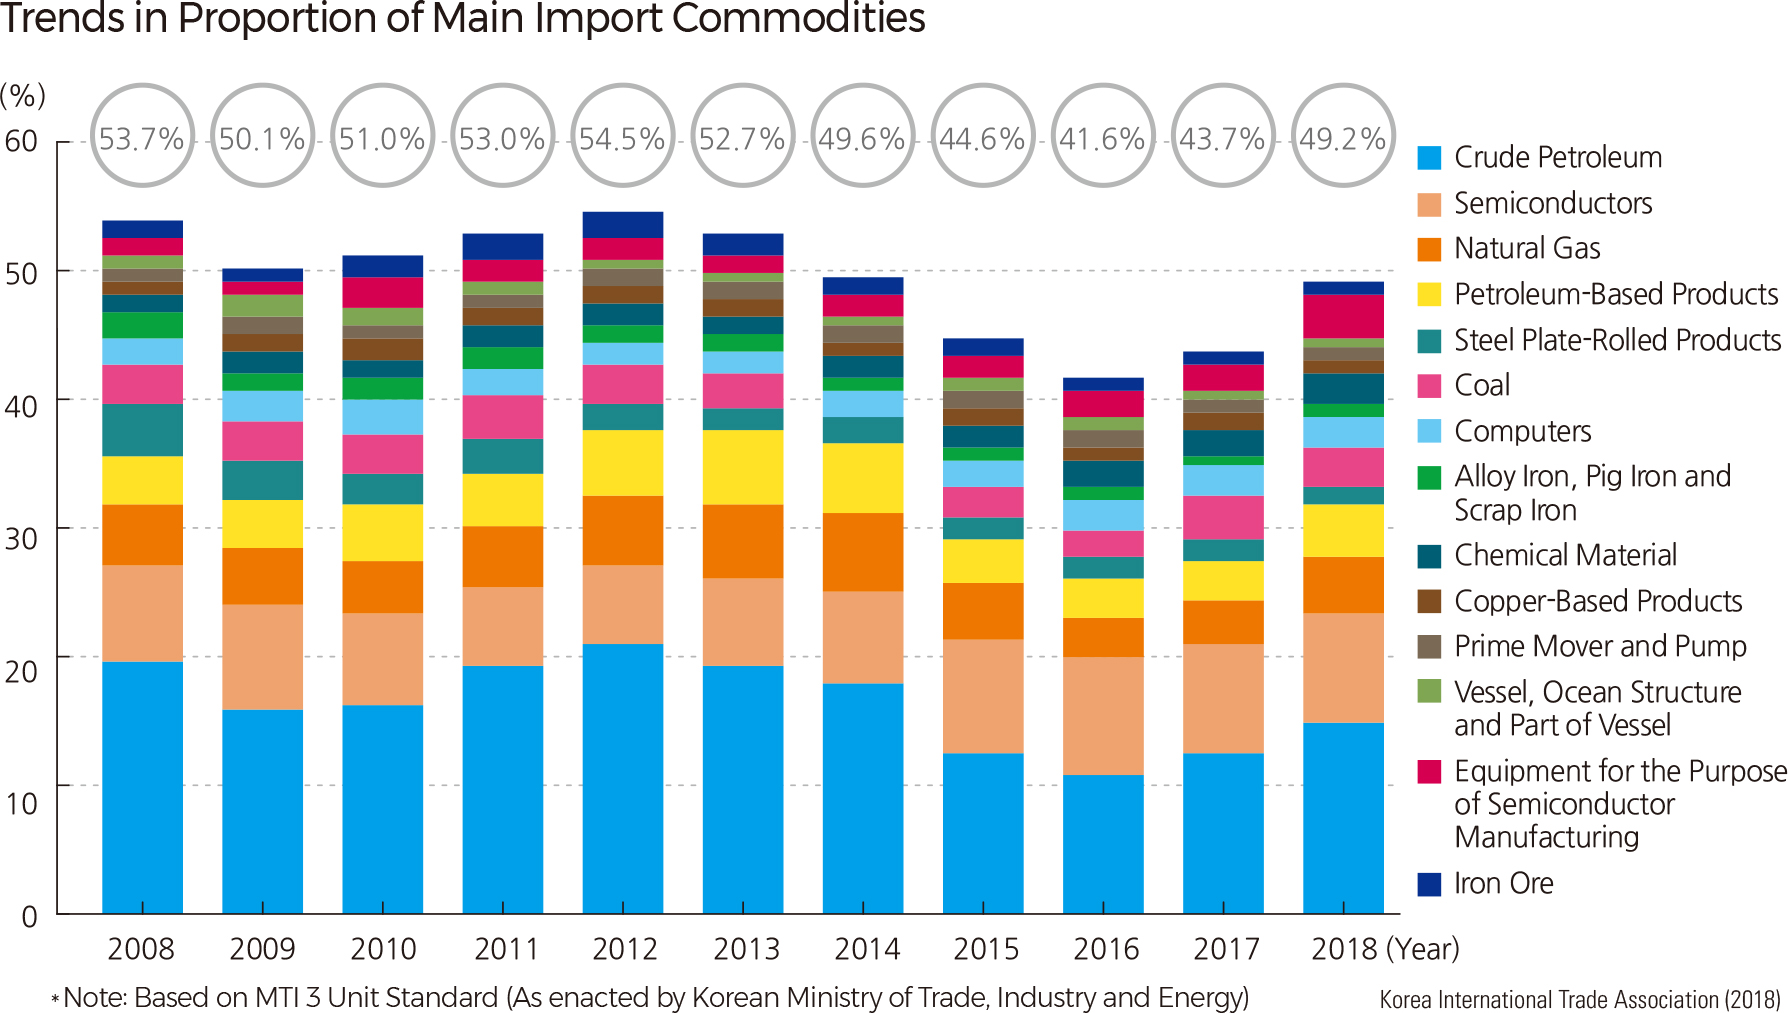 Trends in Proportion of Main Import Commodities